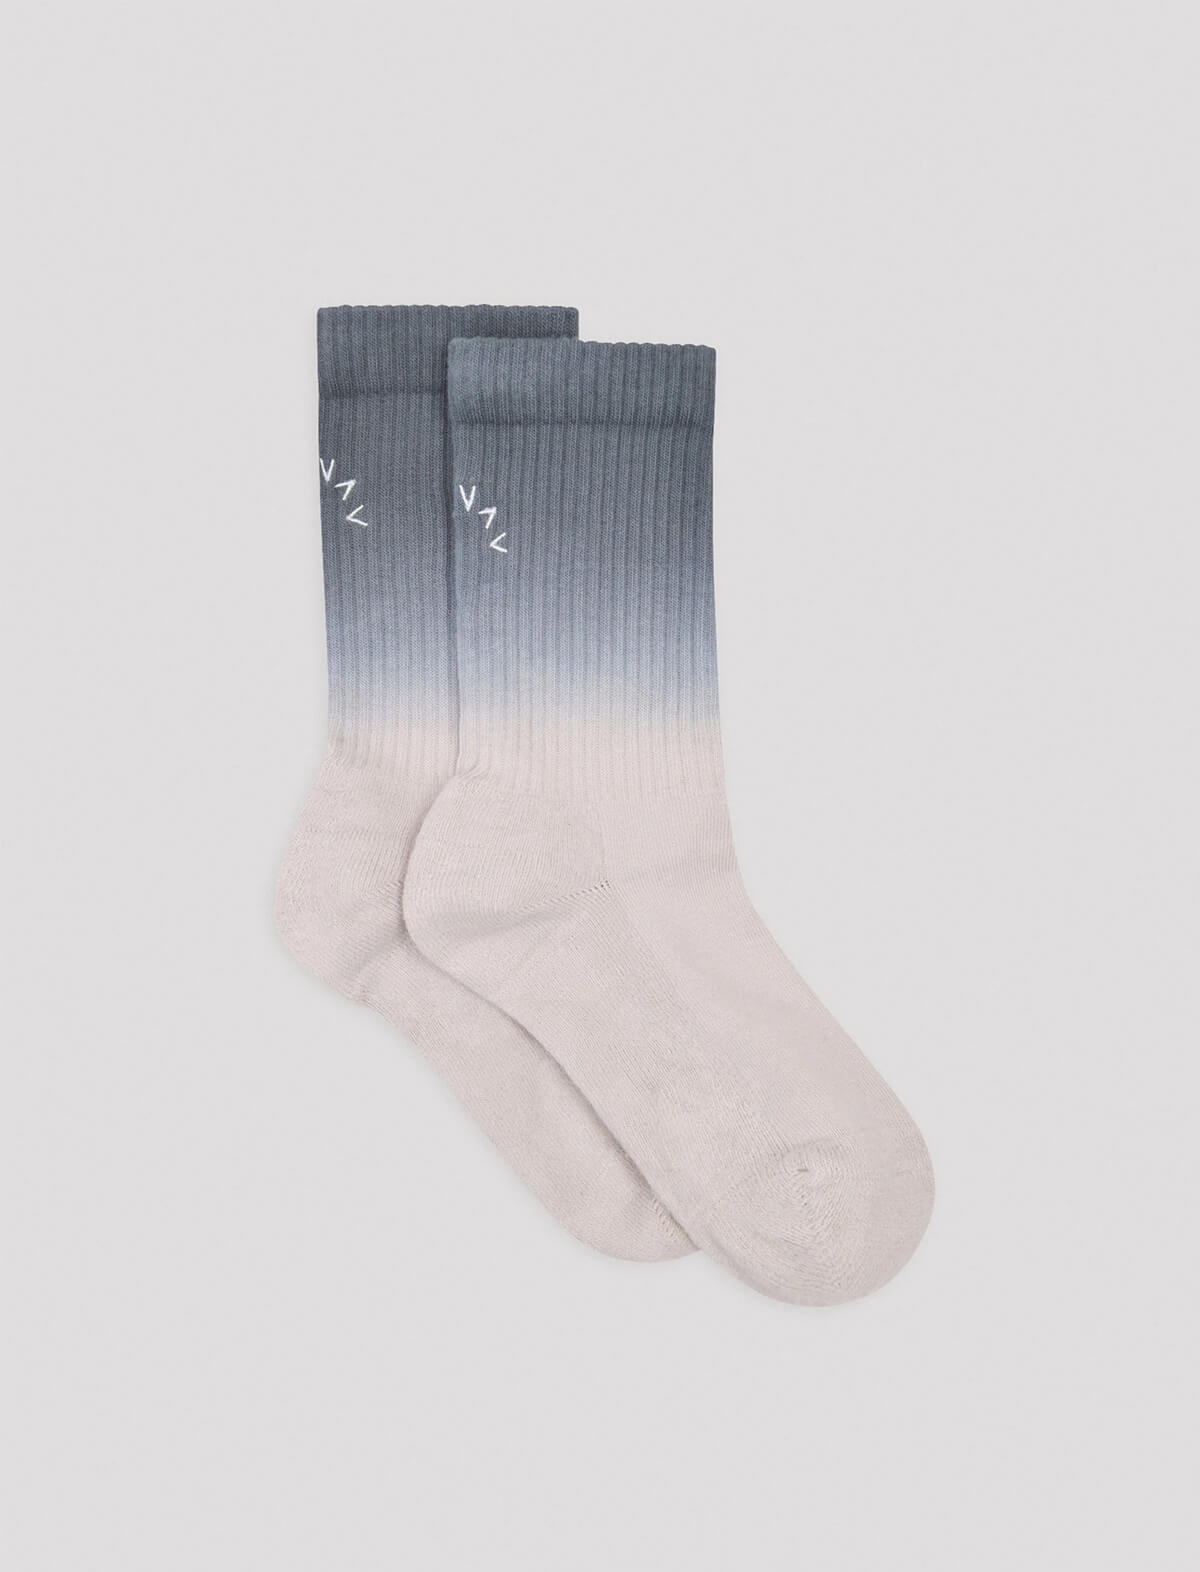 VARLEY Ojai Ombre Sock in Ash Ombre